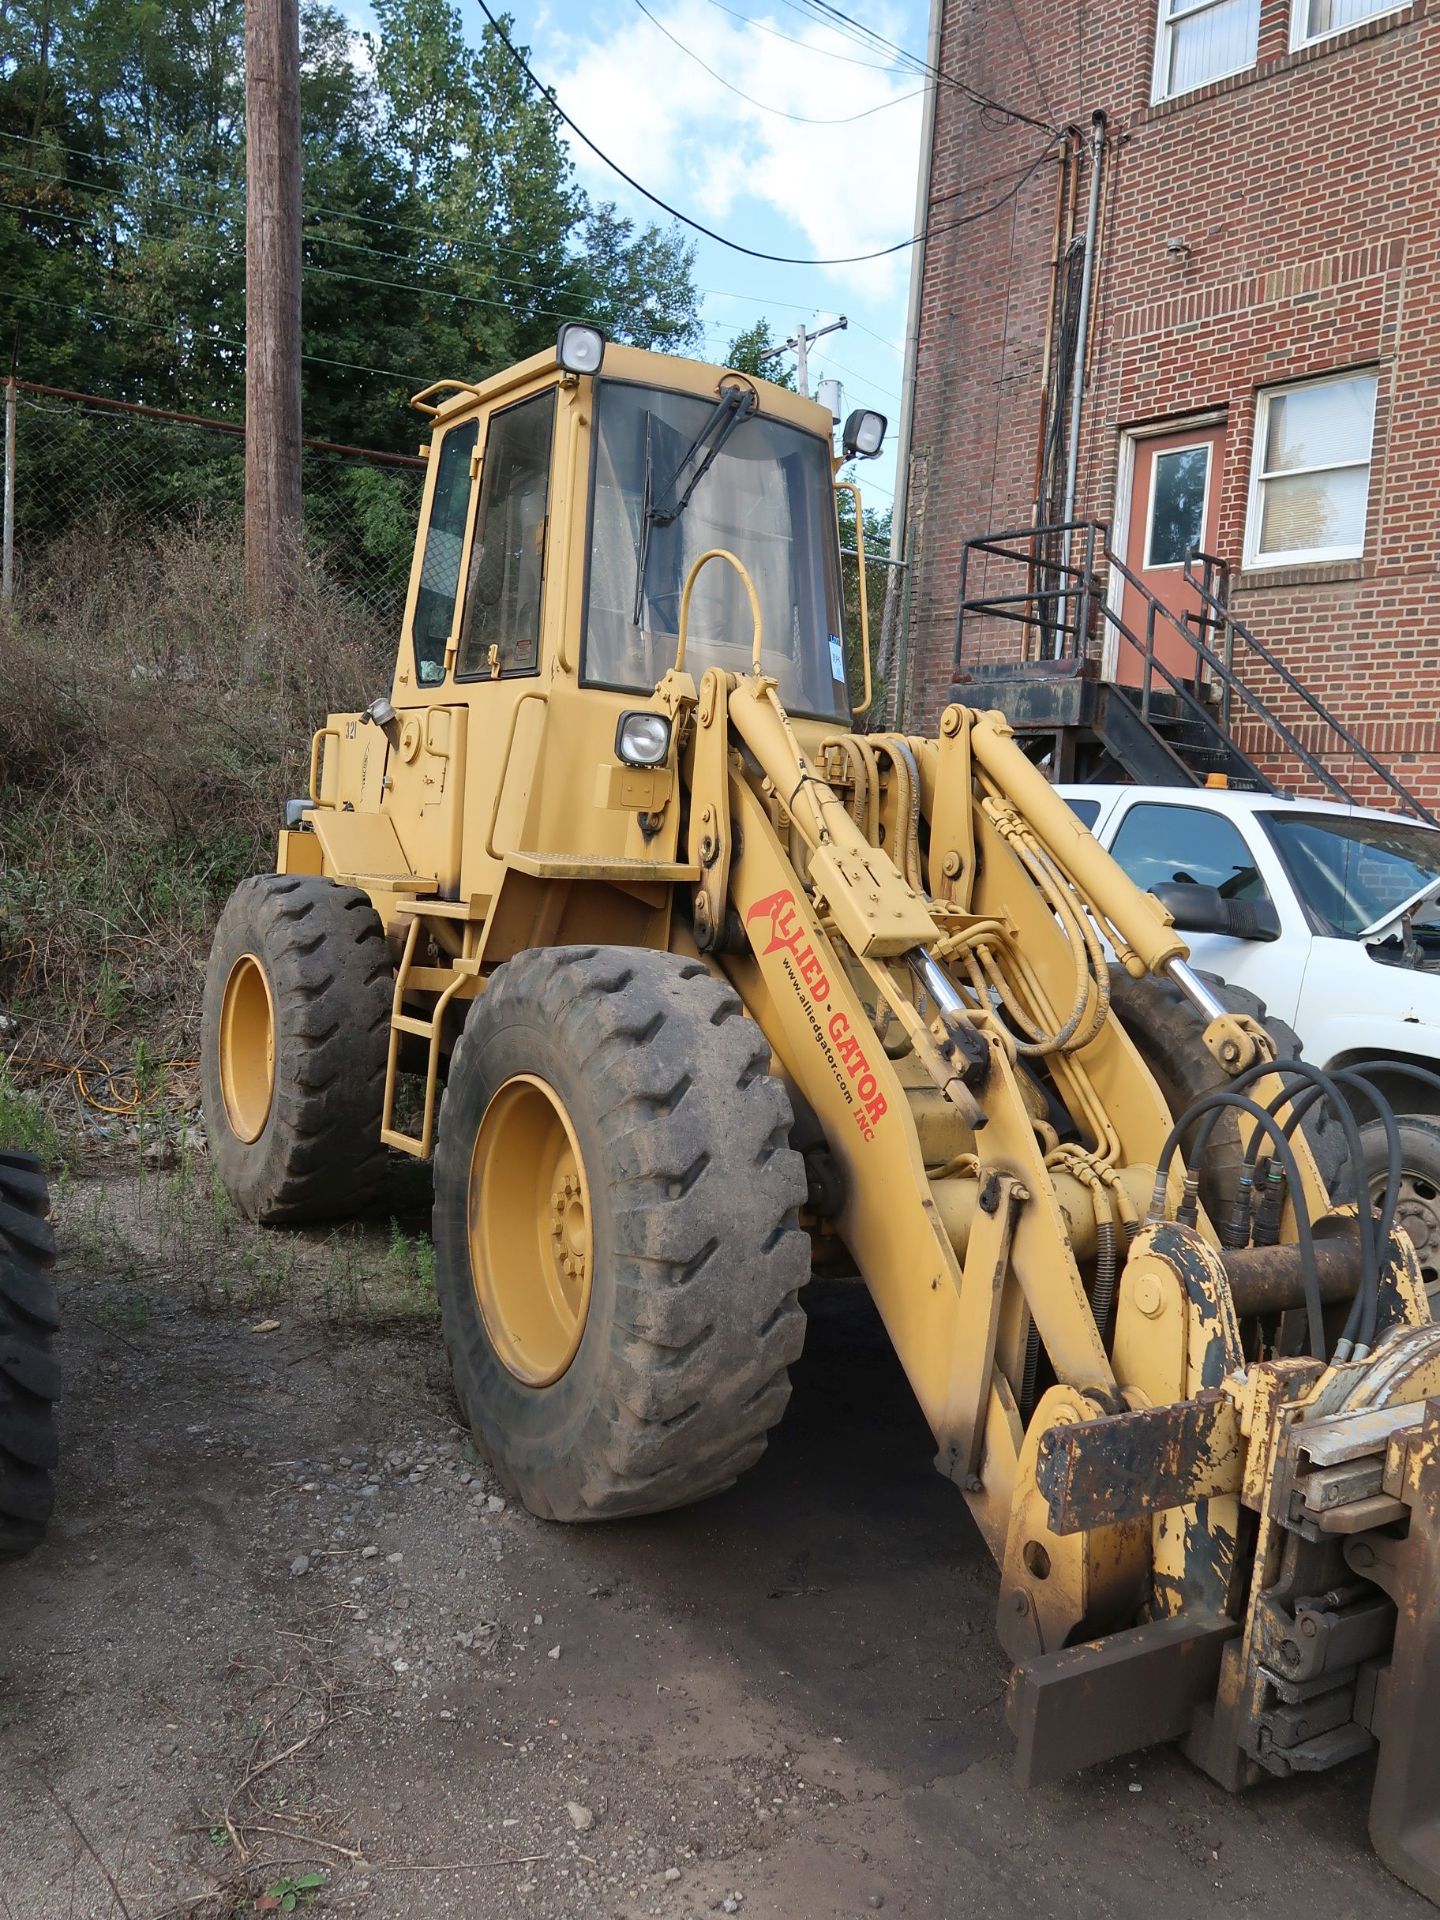 CATERPILLAR MODEL IT14B RUBBER TIRE LOADER; S/N 3NJ00060, 21,804 HOURS, WITH ROTATING FORK - Image 3 of 9